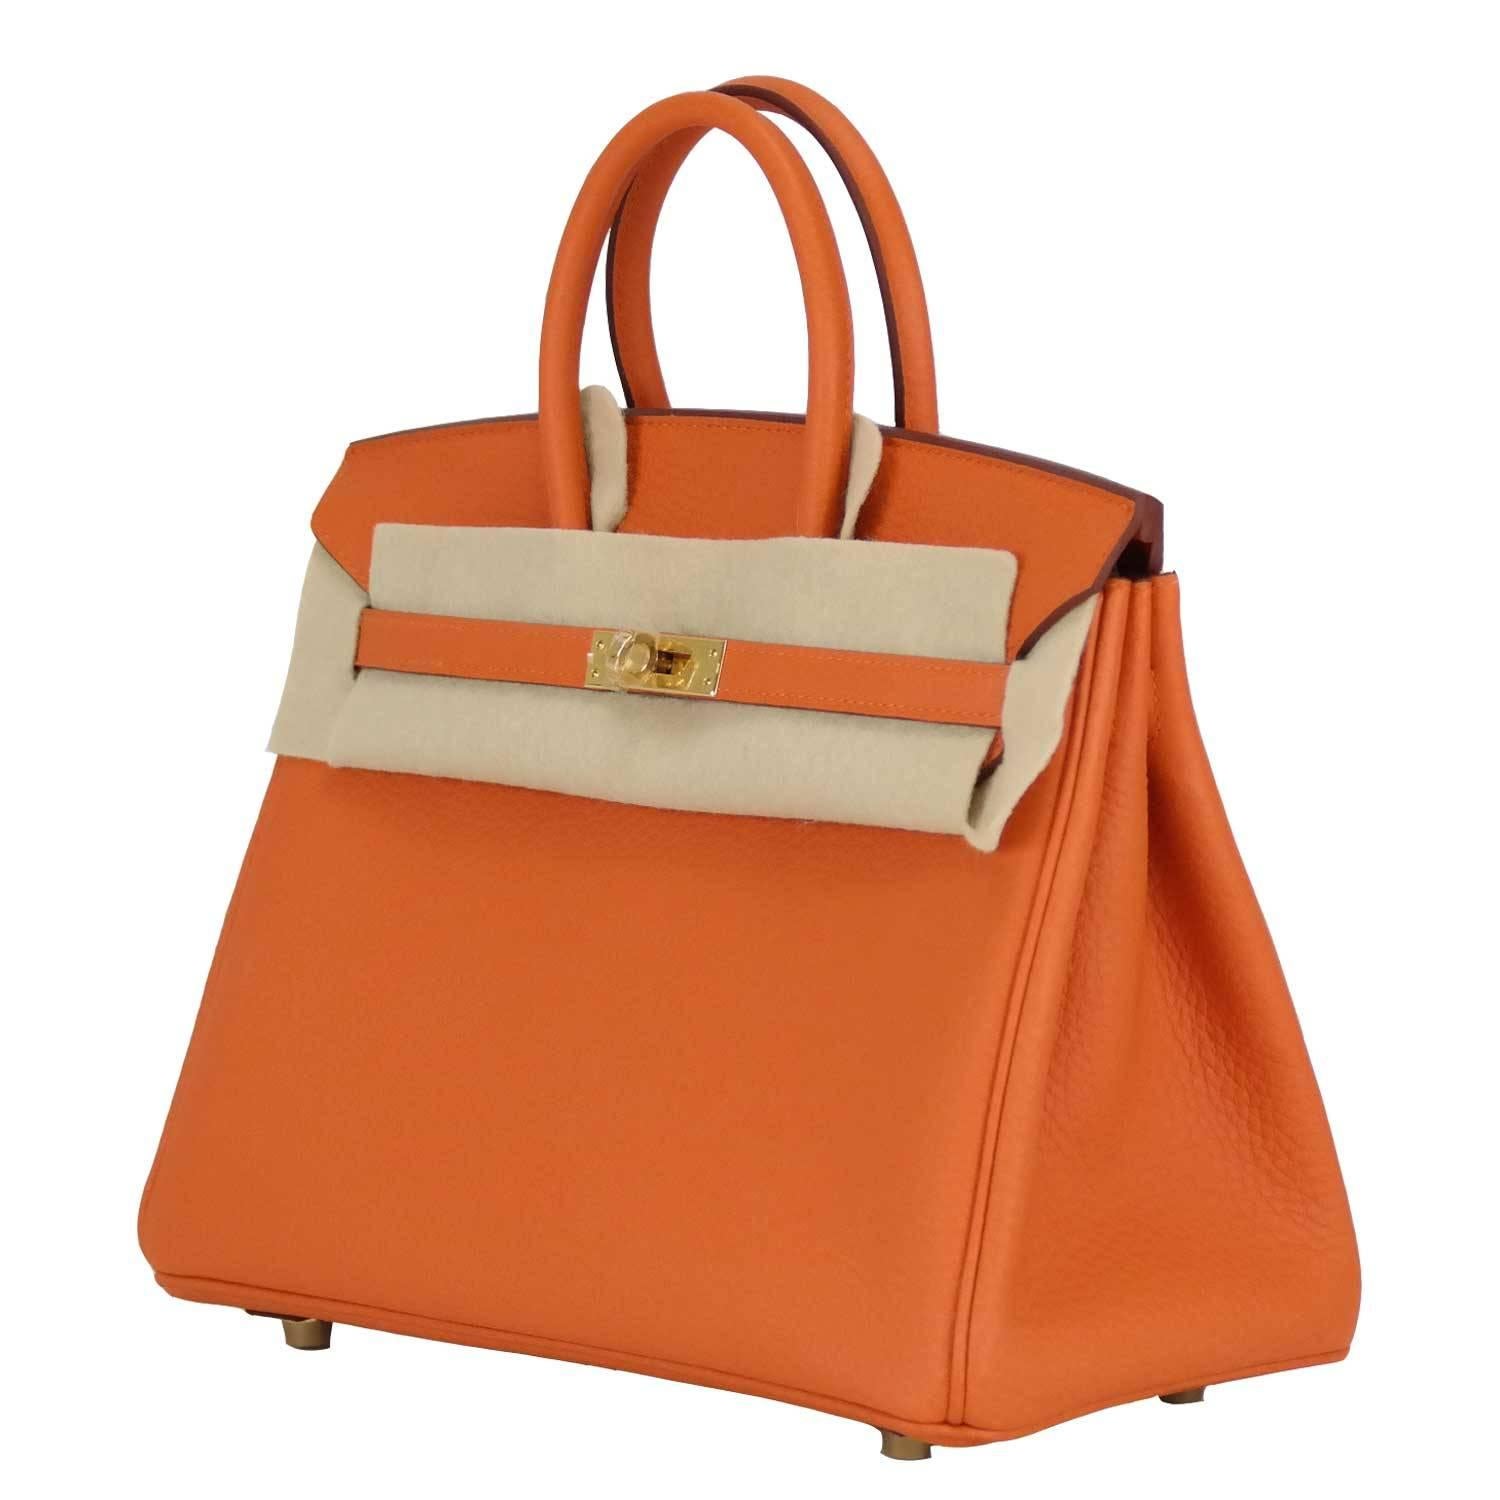 Hermes Birkin 25 Togo 93 Orange Gold Hardware 2016

Pre-owned and never used.

Bought it in Hermes store 2016.

Model: Birkin

Size; 25cm width x 20cm height x 13cm length.

Color: Orange

Details:
*Protective felt removed for purposes